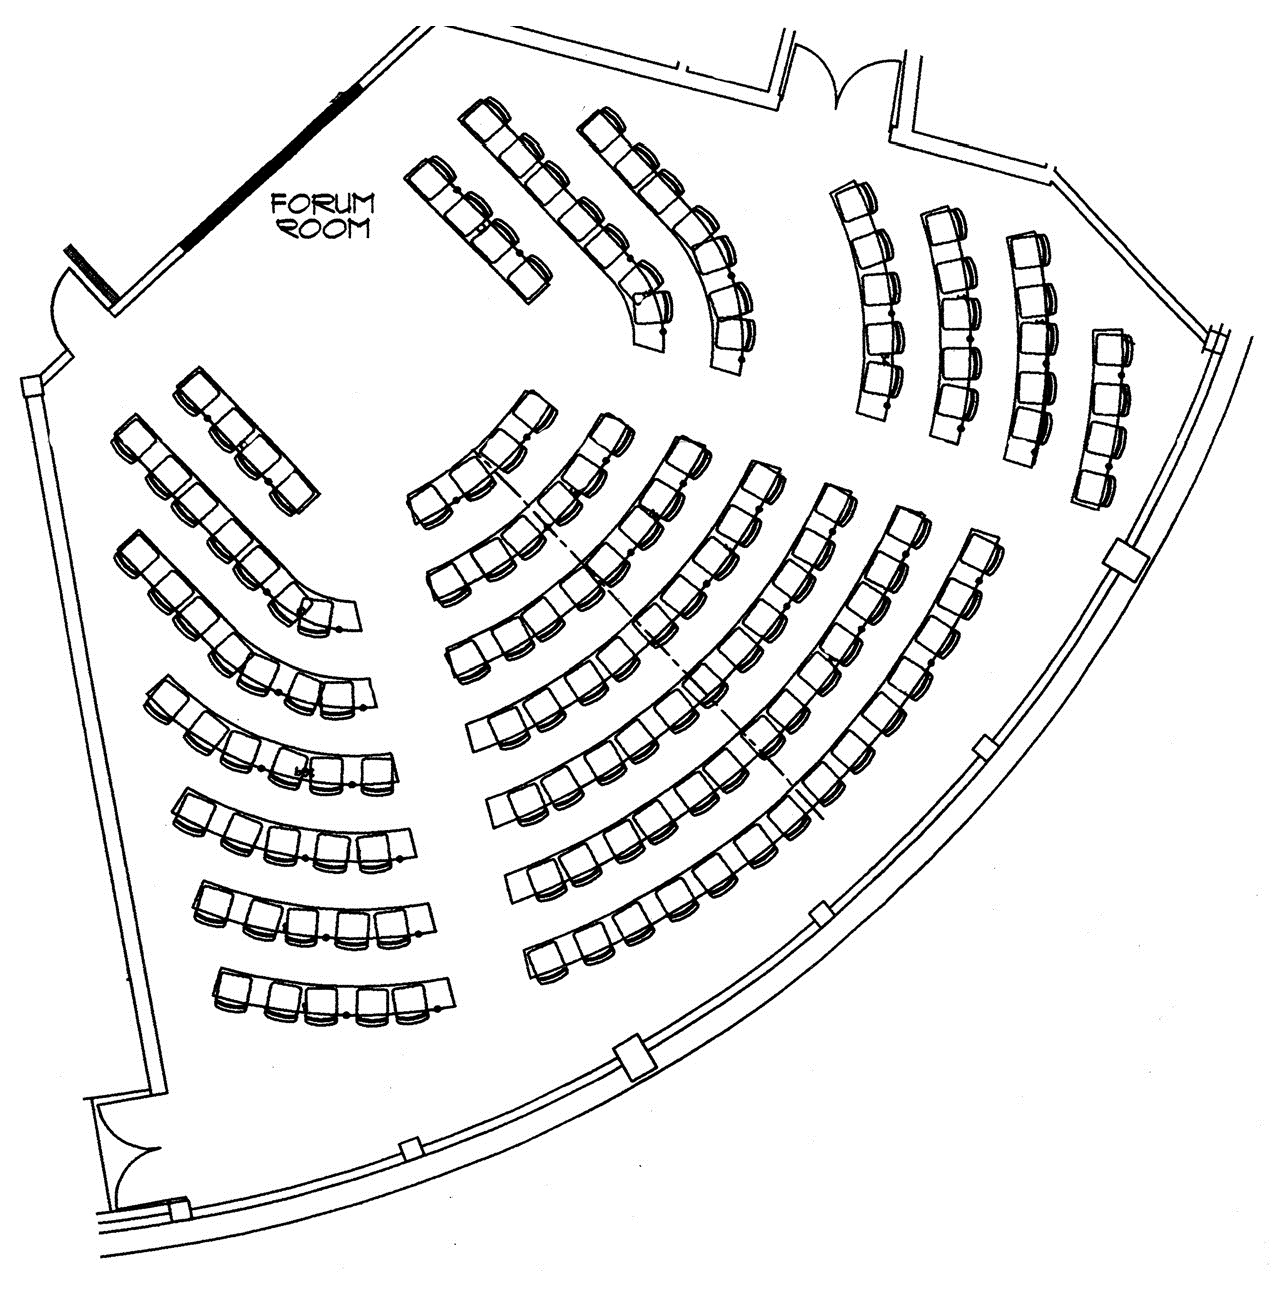 Seating chart of Bauer Forum